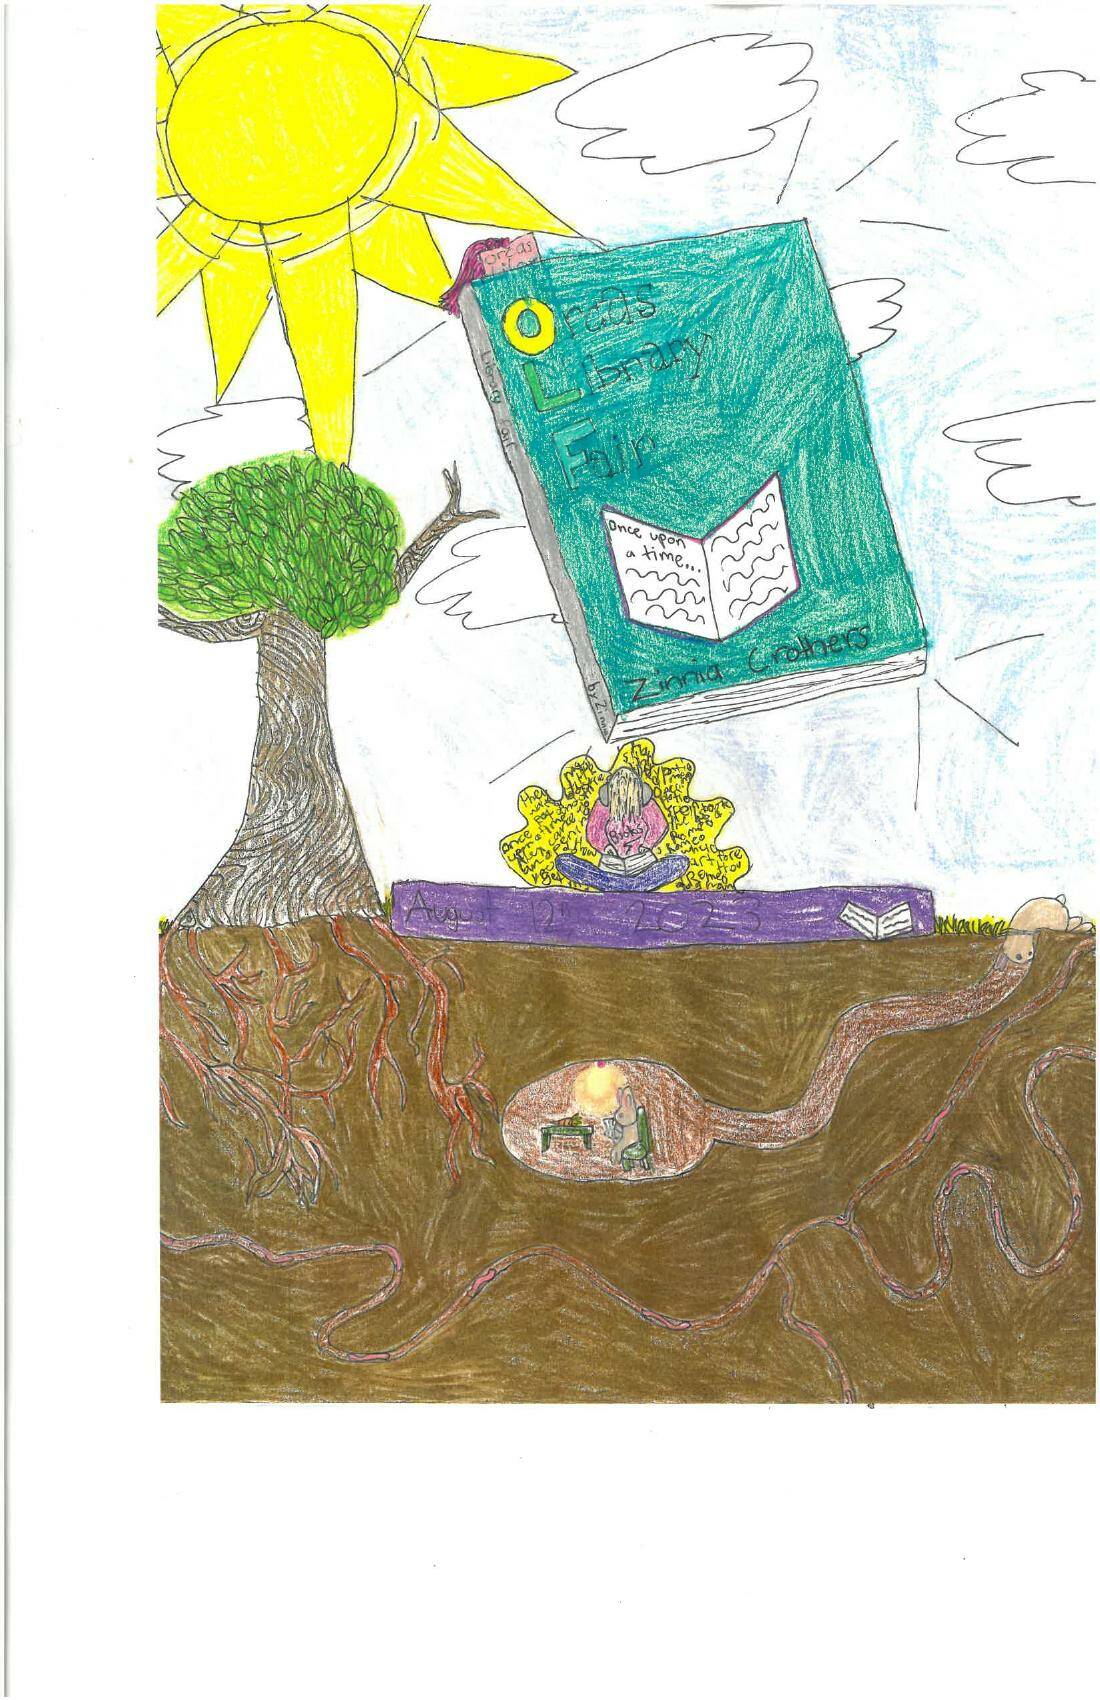 The under 13 winner of the Library Fair kid’s poster contest.